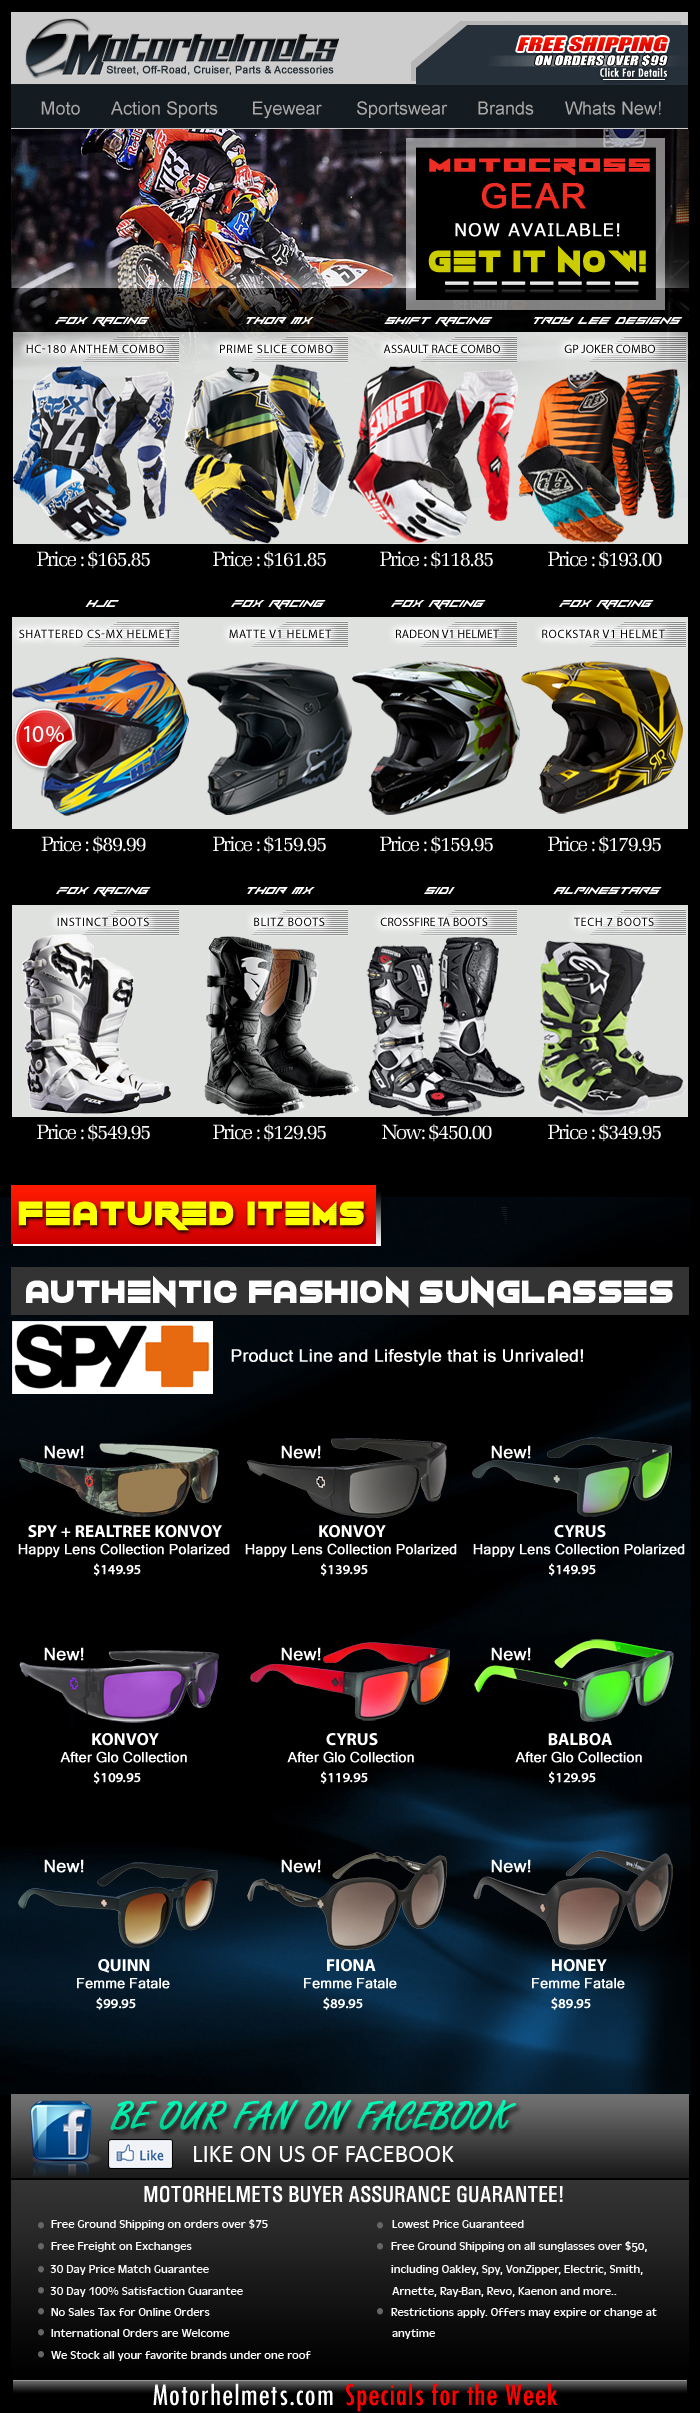 New Arrivals...Fresh Motocross Gear Selection from Fox, Thor MX, Shift, TLD and more!